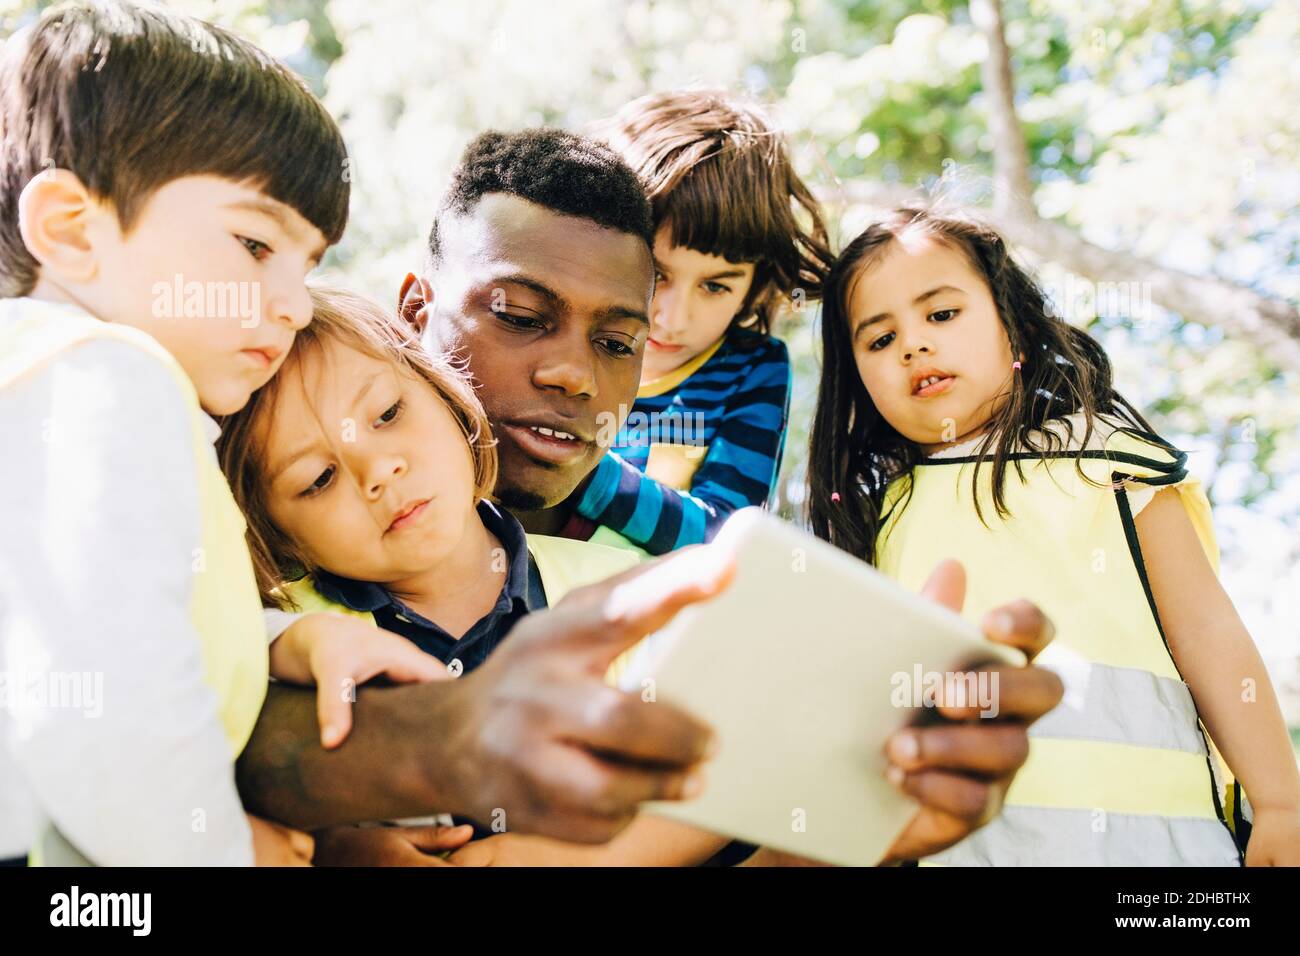 Male mid adult teacher sharing digital tablet with students in playground Stock Photo